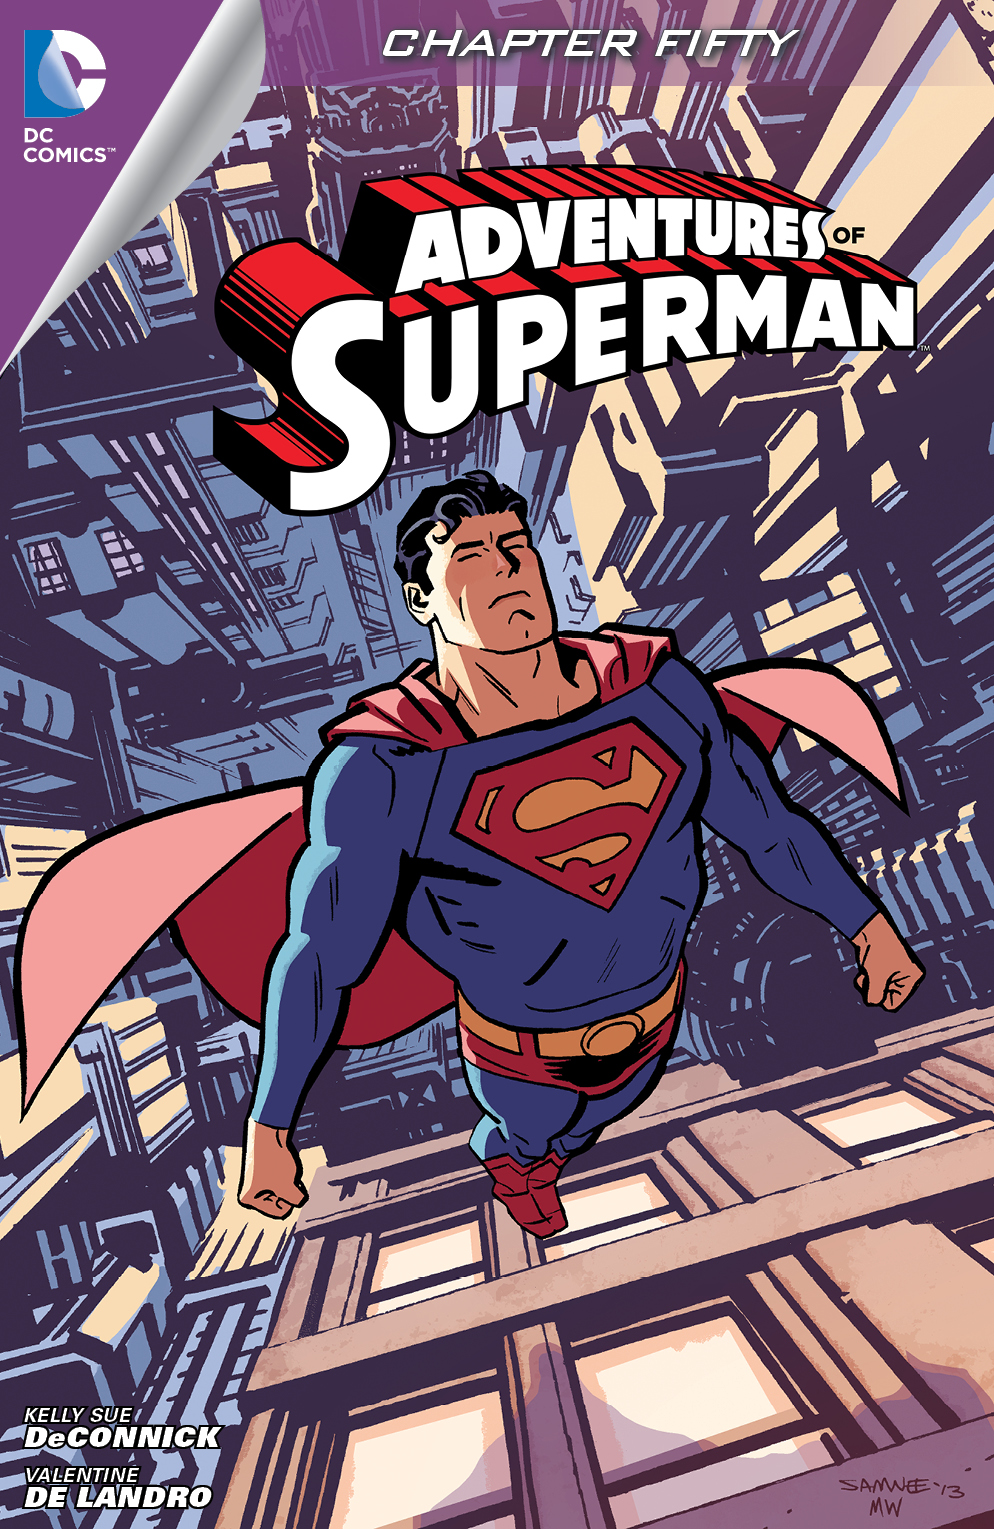 Adventures of Superman (2013-) #50 preview images